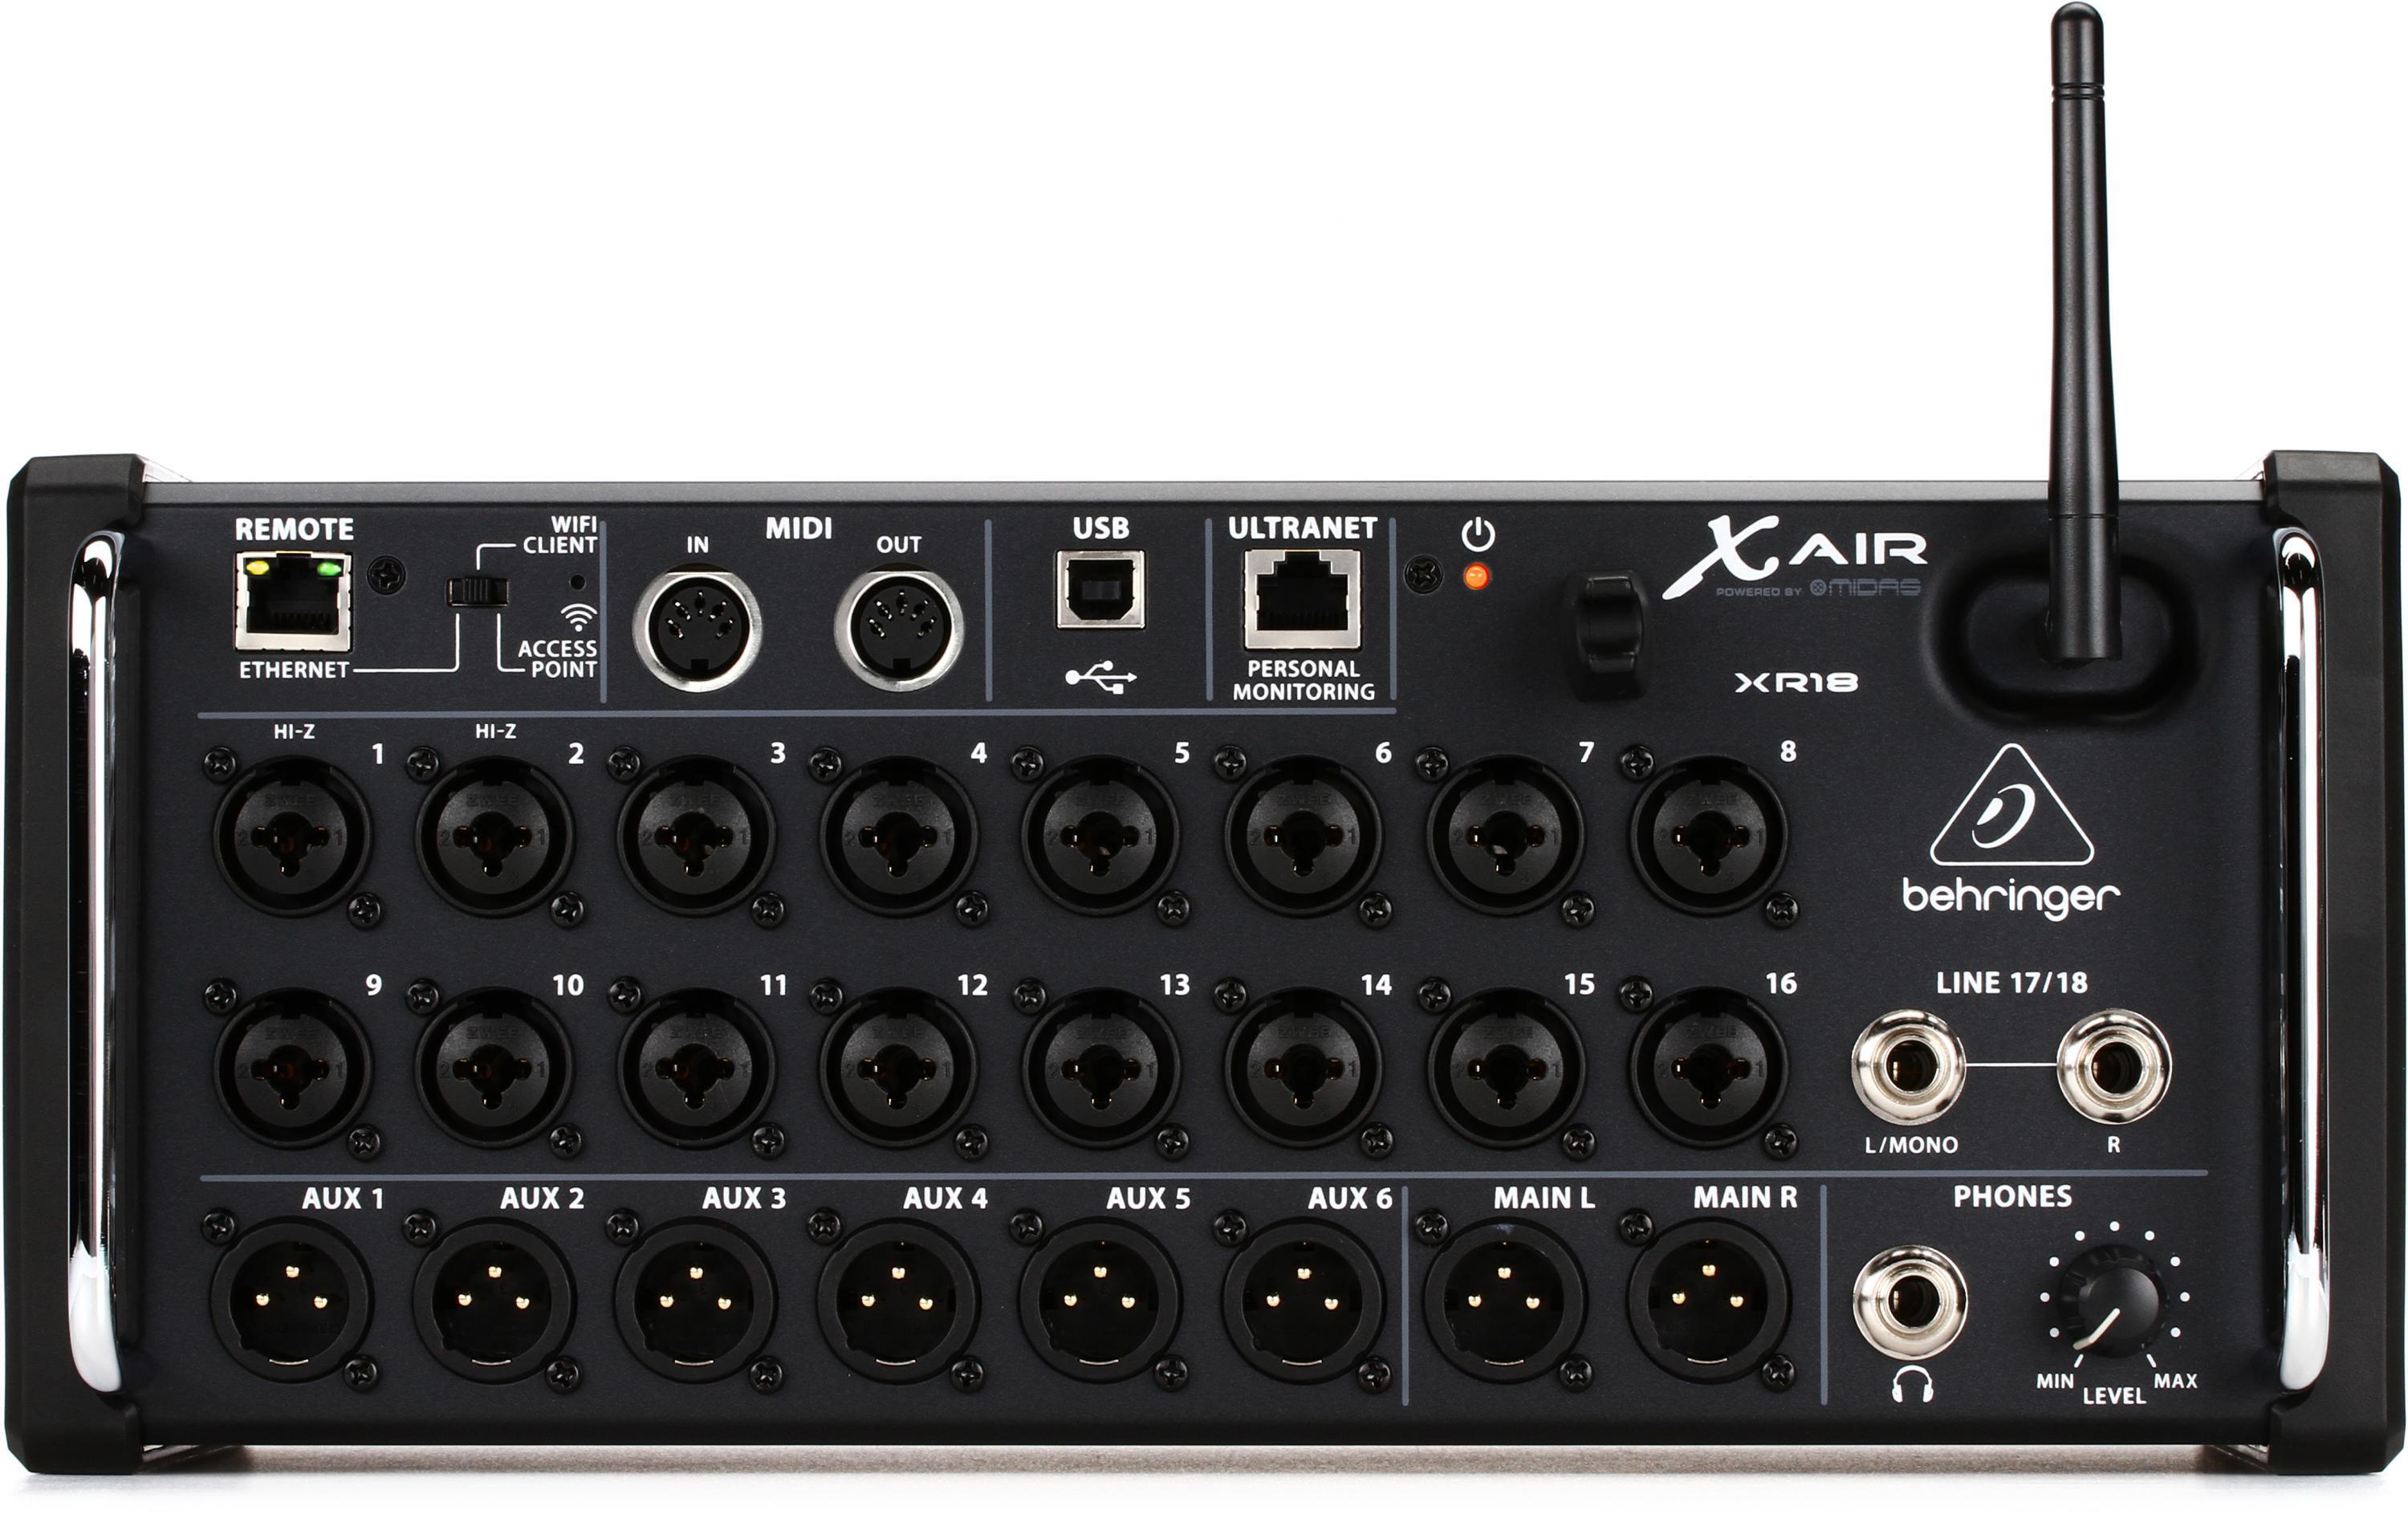 Air　Behringer　18-channel　Reviews　X　Digital　Mixer　XR18　Tablet-Controlled　Sweetwater